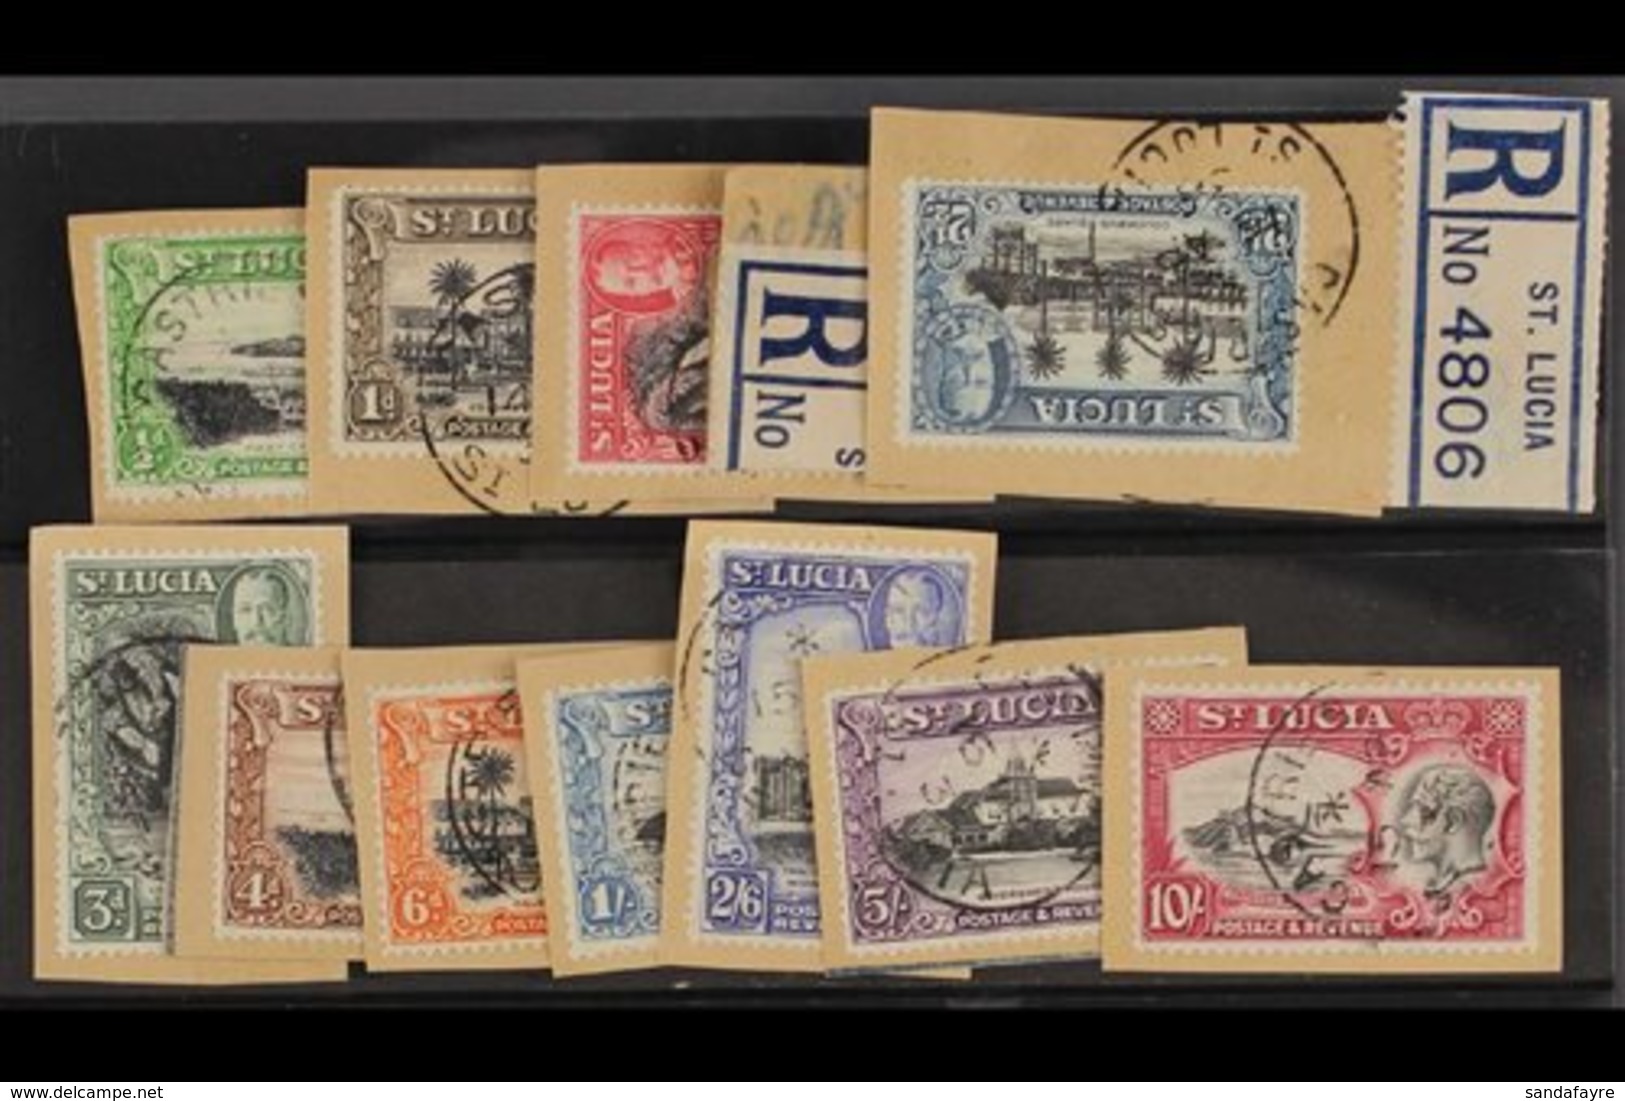 1936 Geo V Pictorial Set Complete, SG 113/24, Superb Used On Individual Pieces. (12 Stamps) For More Images, Please Visi - Ste Lucie (...-1978)